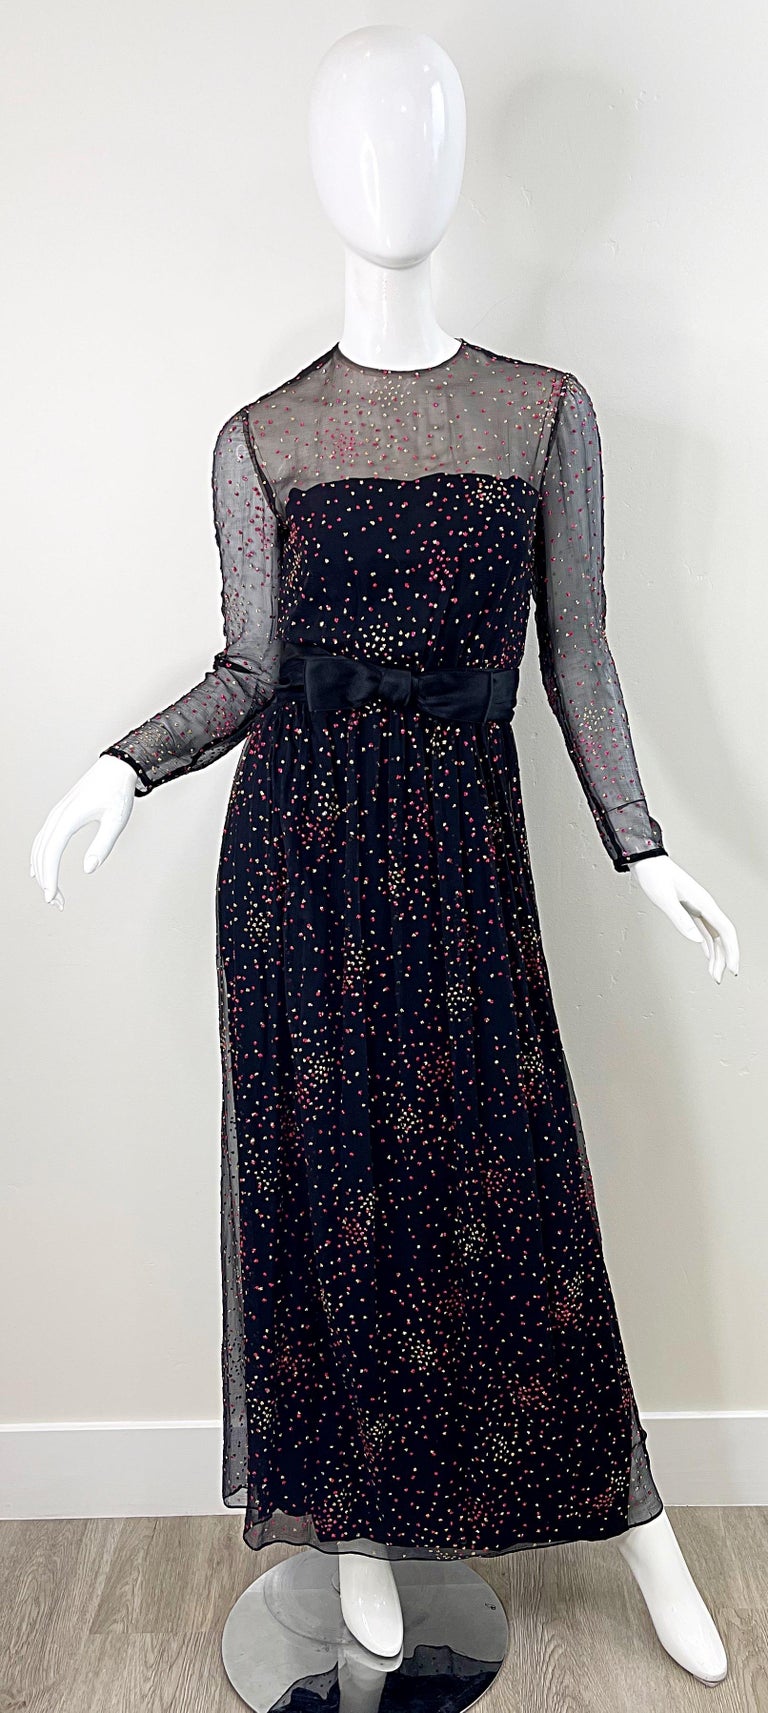 Beautiful 1960s KIKI HART black silk chiffon nude illusion evening gown ! Features sheer above the bust and sleeves. Full metal zipper up the back with hook-and-eye closure. Attached bow belt has hidden snap. Hot pink and gold glitter throughout (